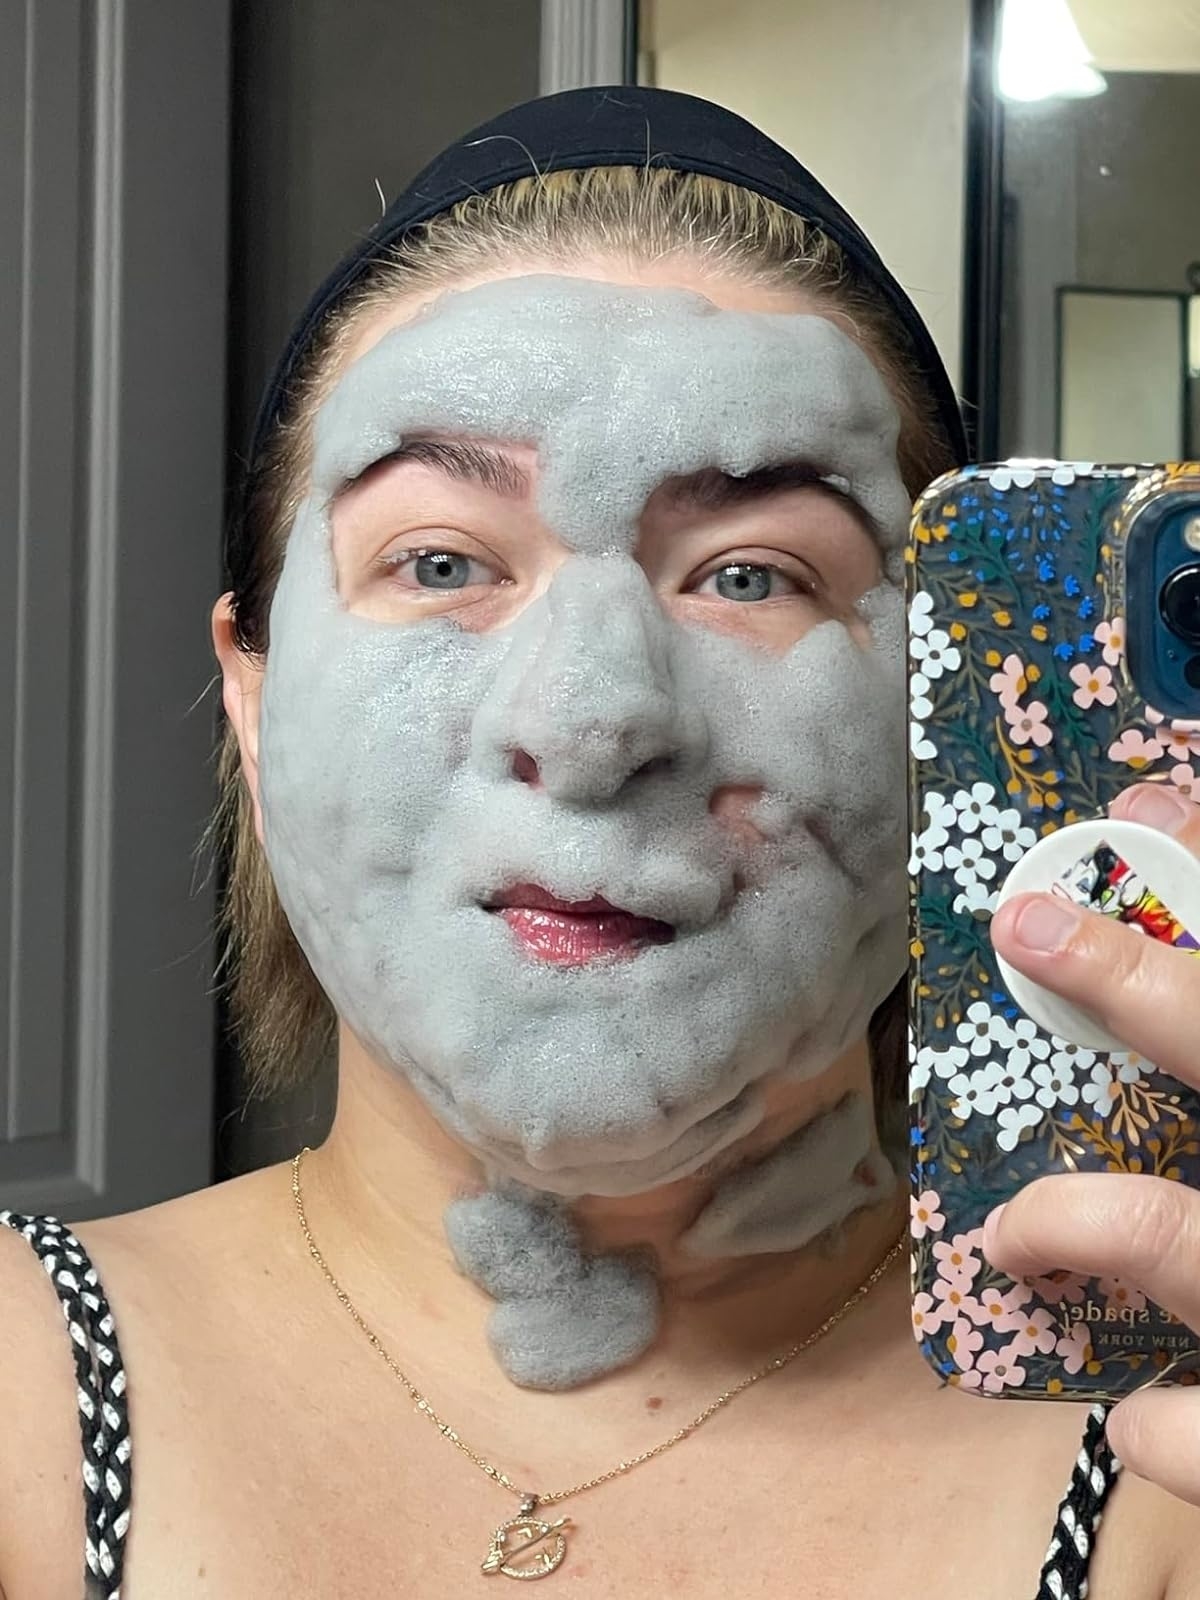 Reviewer’s photo of their face with foamy mask on it